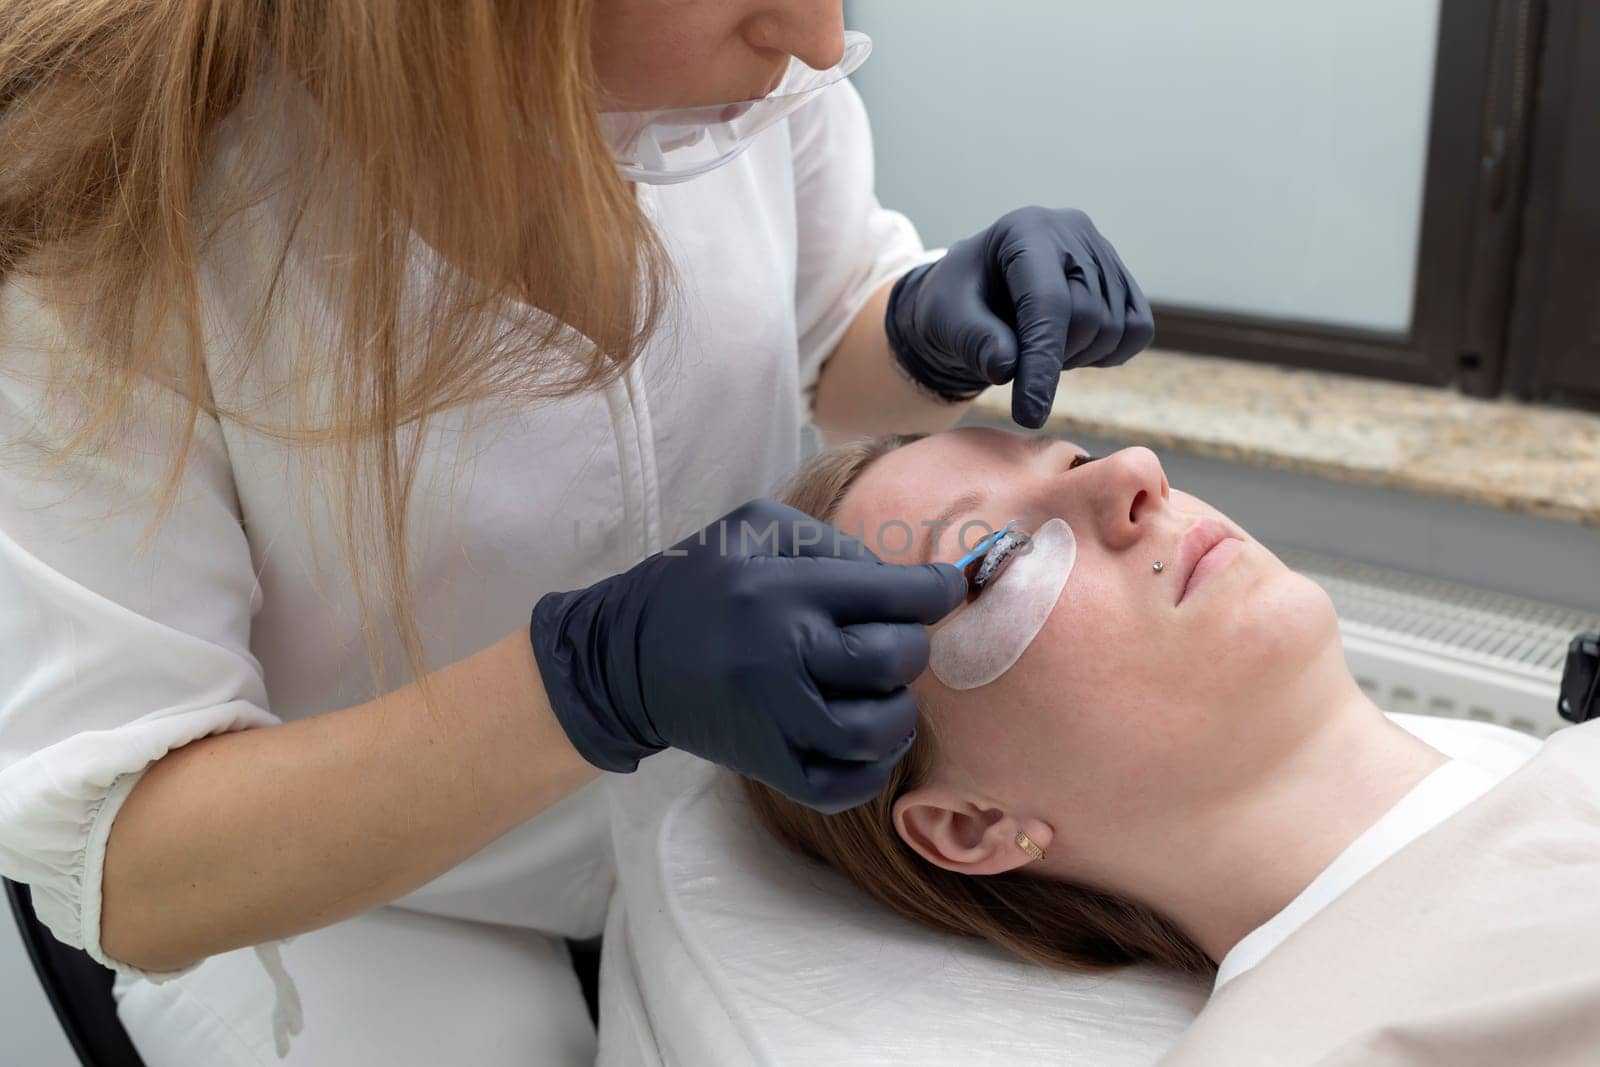 Beautician Applies Lash Lift Lotion On Rolled Hair During Eyelash Lamination Treatment Procedure In Beauty Salon. Curling, Staining, Extension Procedures For Lashes. Horizontal Plane.